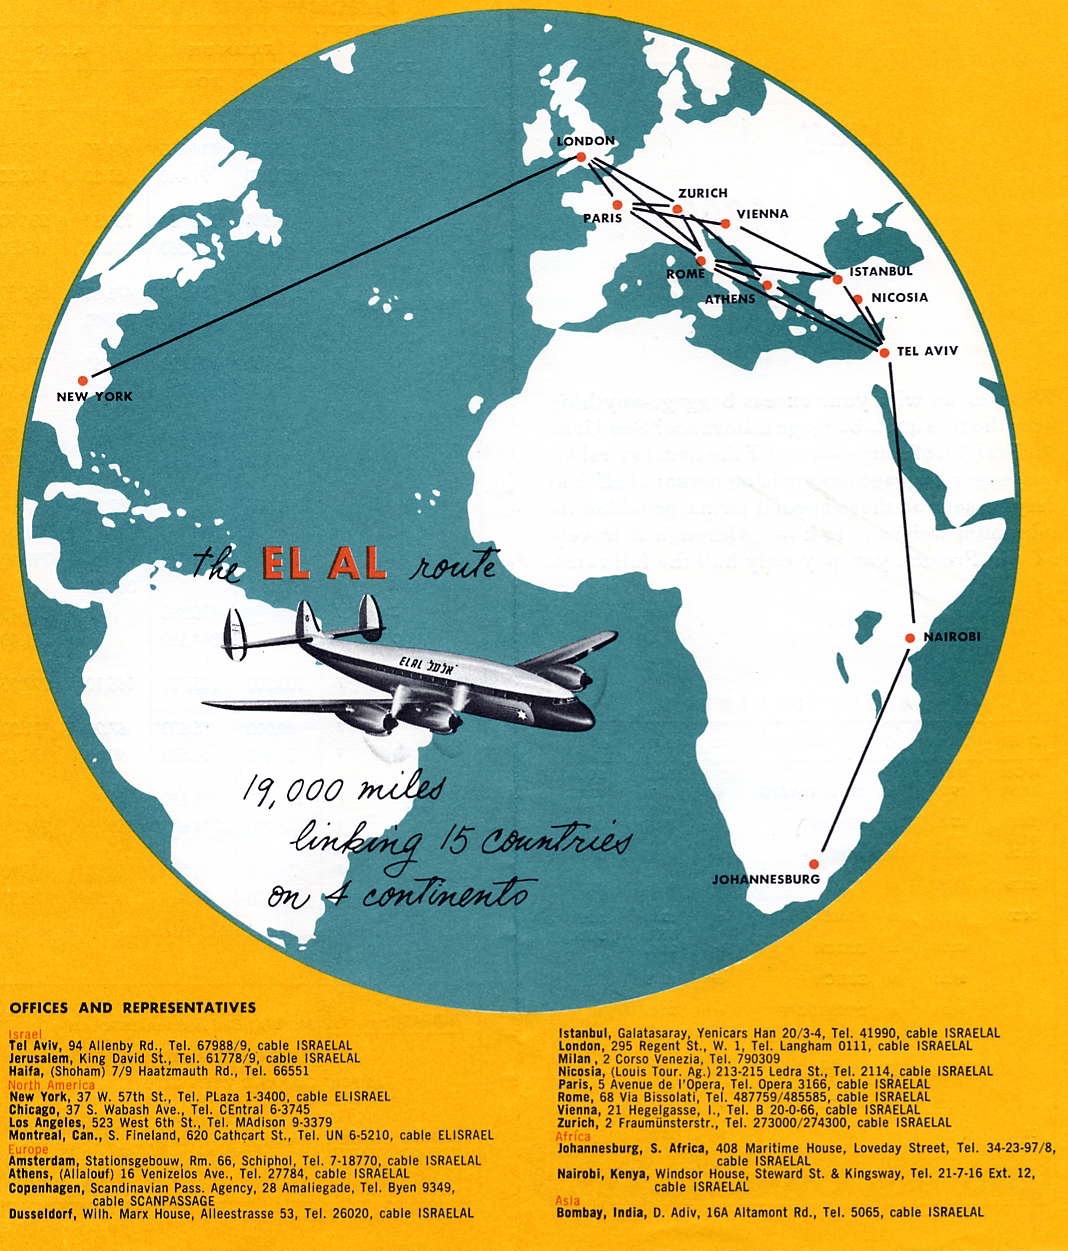 EL AL's network from April 1951 through February 1956, taken from a timetable dated winter 55/56. Within two years after inaugurating scheduled service, EL AL linked 12 cities on routes covering 30,000km (19,000mi). The reference in the illustration to '15 countries' includes those points used for refueling stops. (MG) 